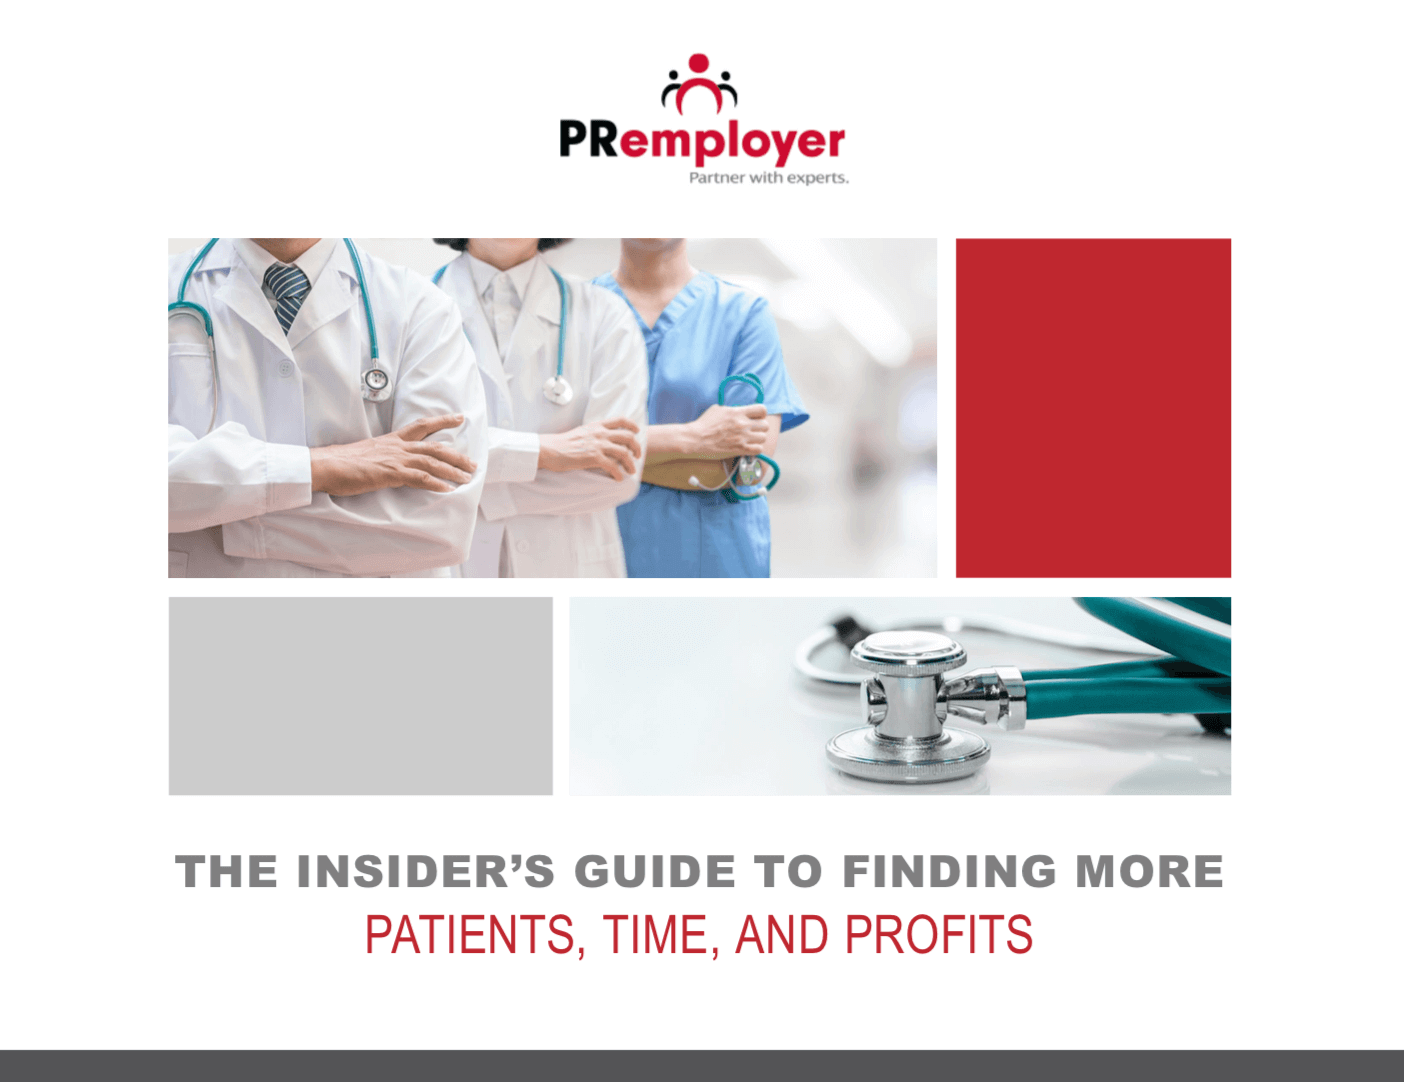 The Insiders Guide to Finding More Patients, Time and Profits